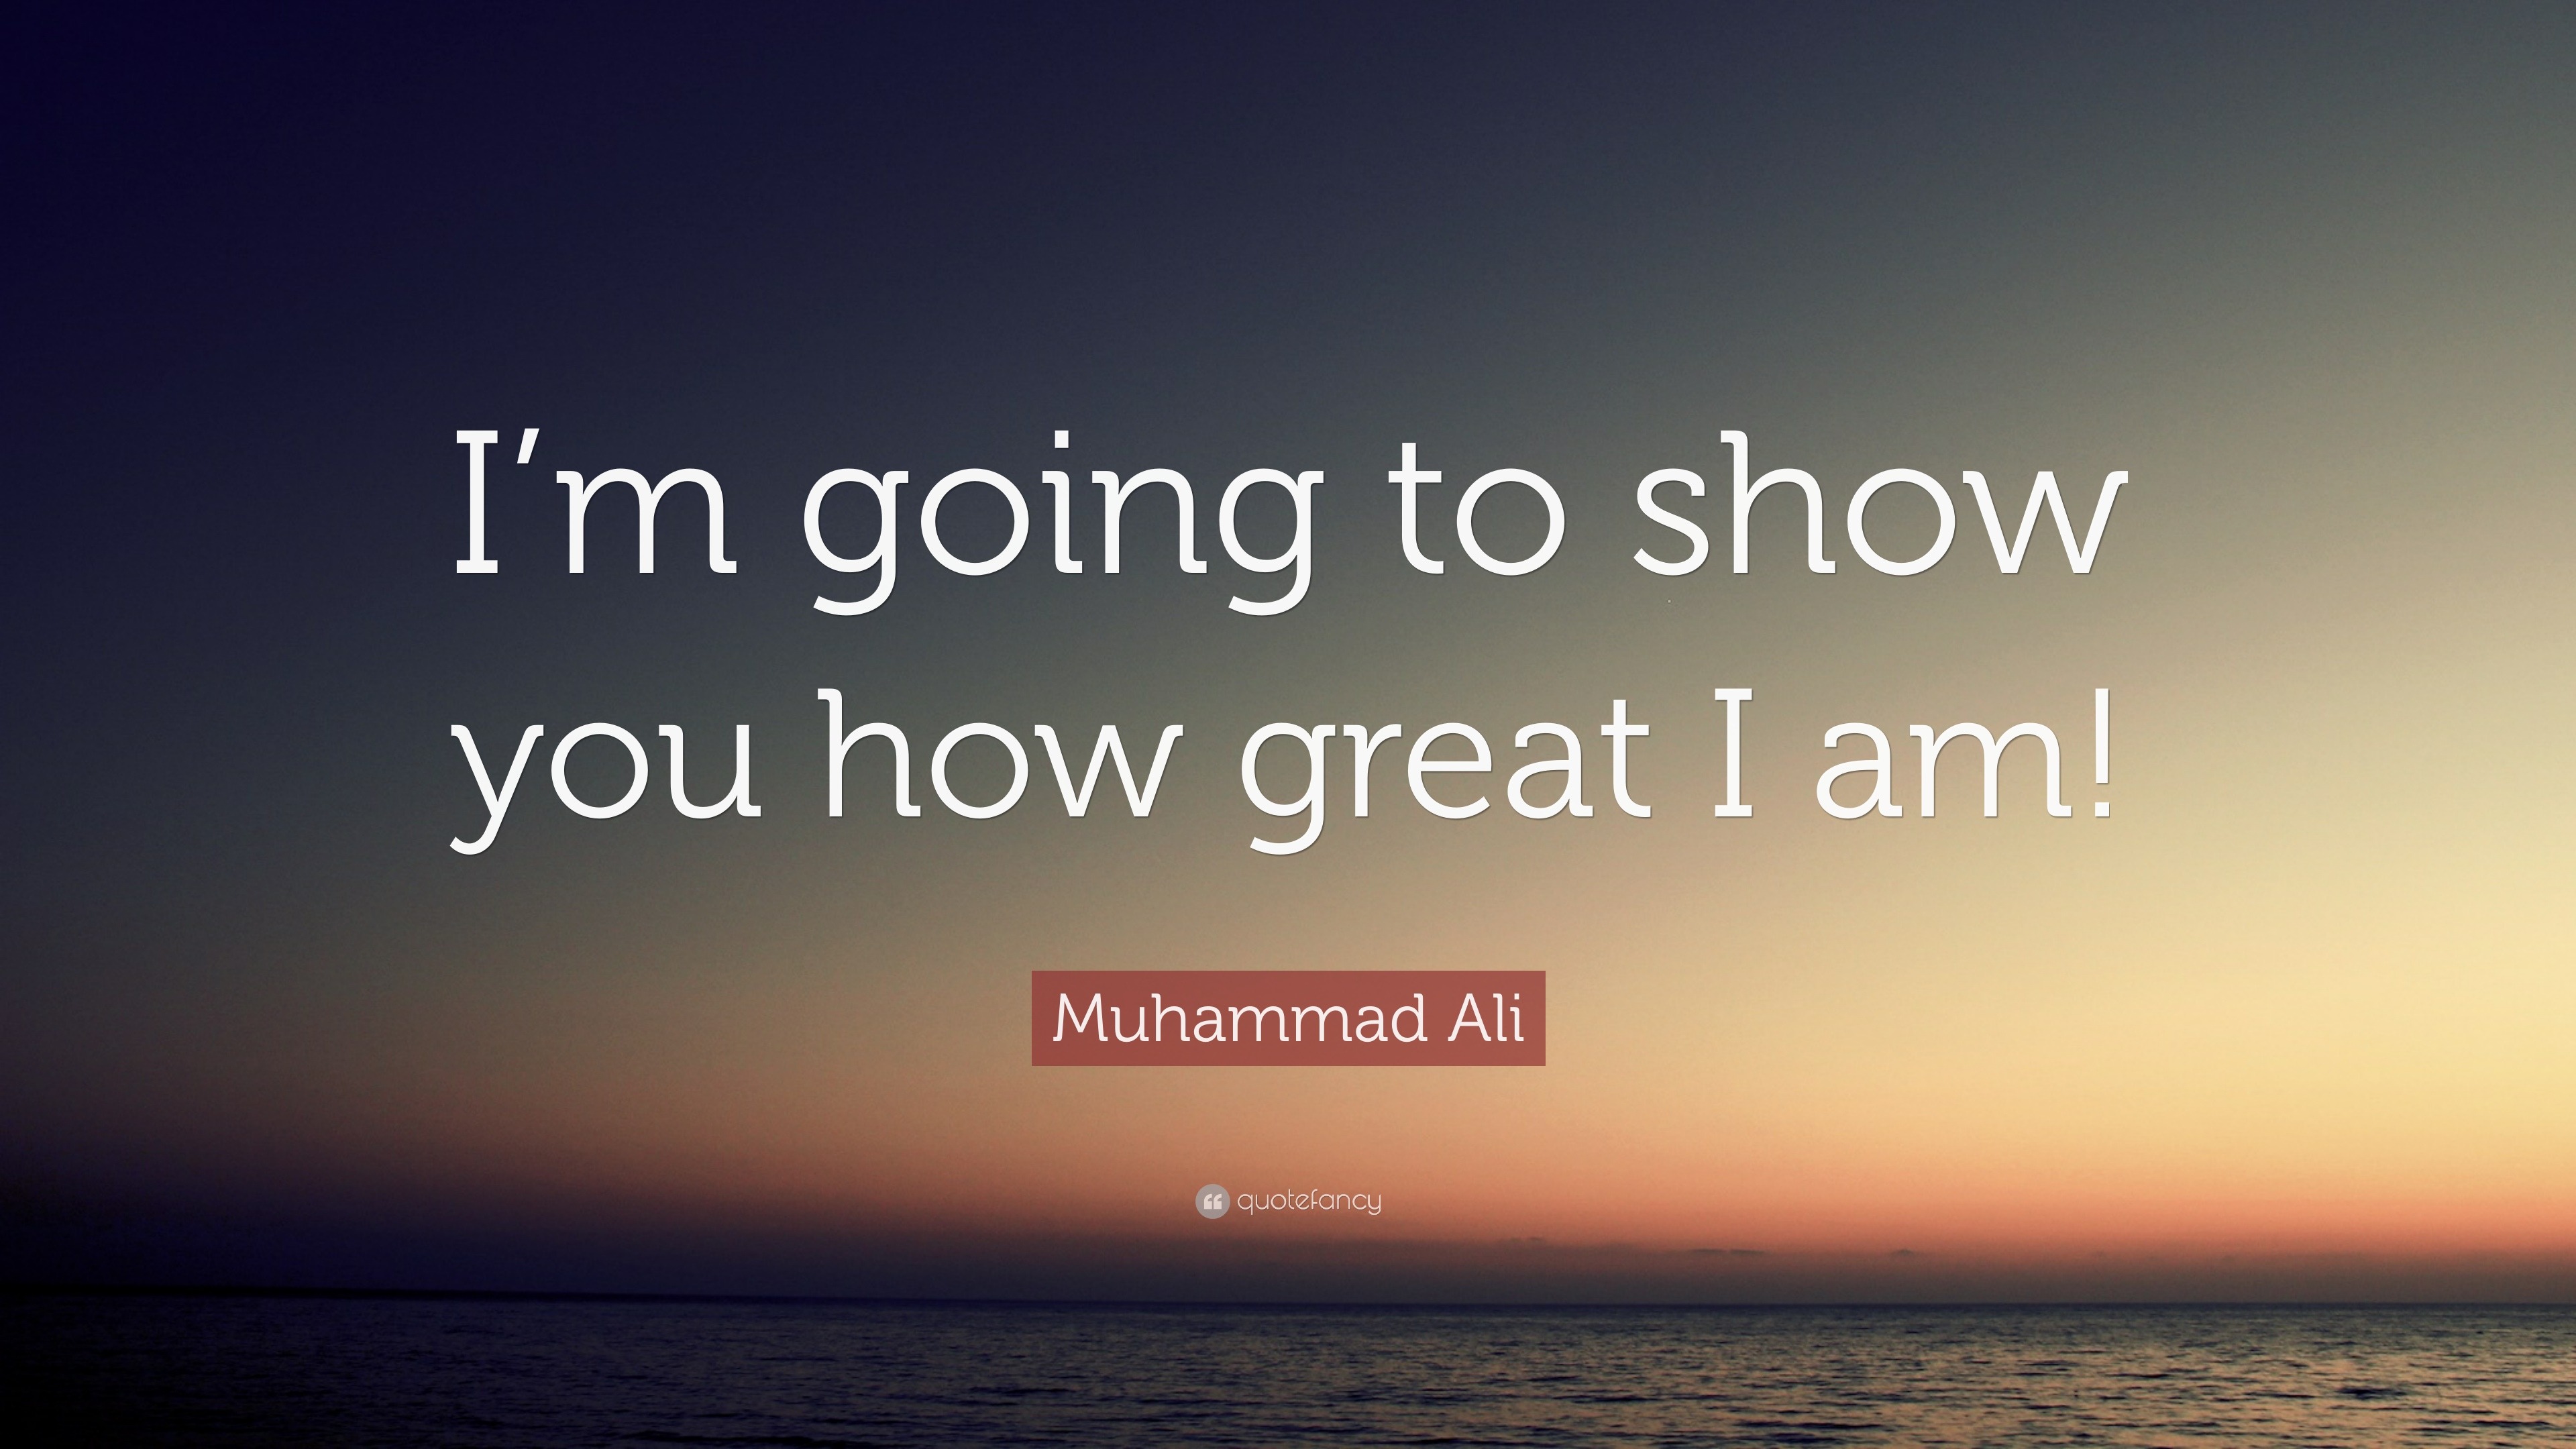 Muhammad Ali Quote “I’m going to show you how great I am!” (12